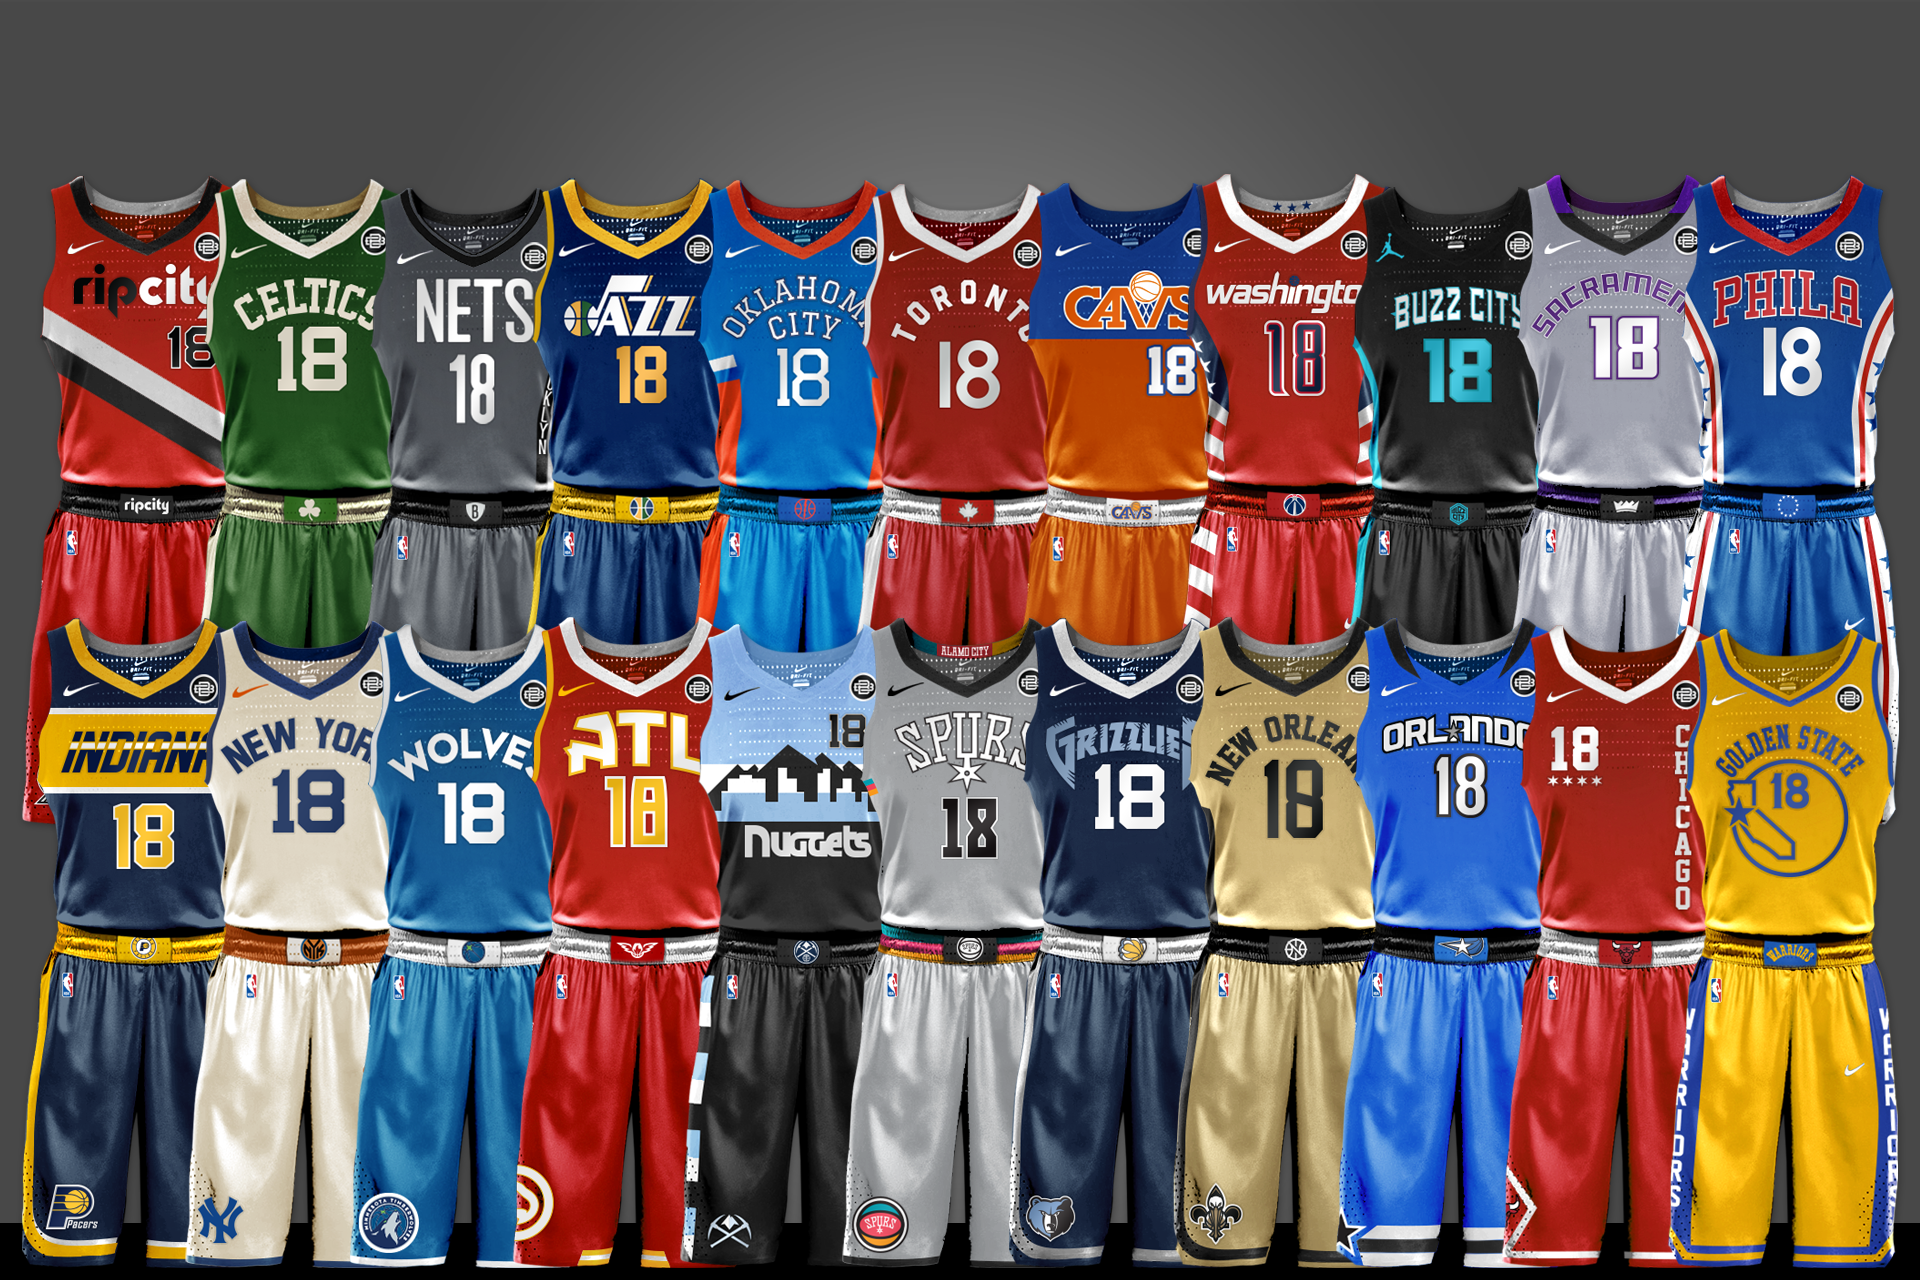 Nike reveals first NBA jerseys of new partnership, scraps 'home' and 'road'  designations (Photos)